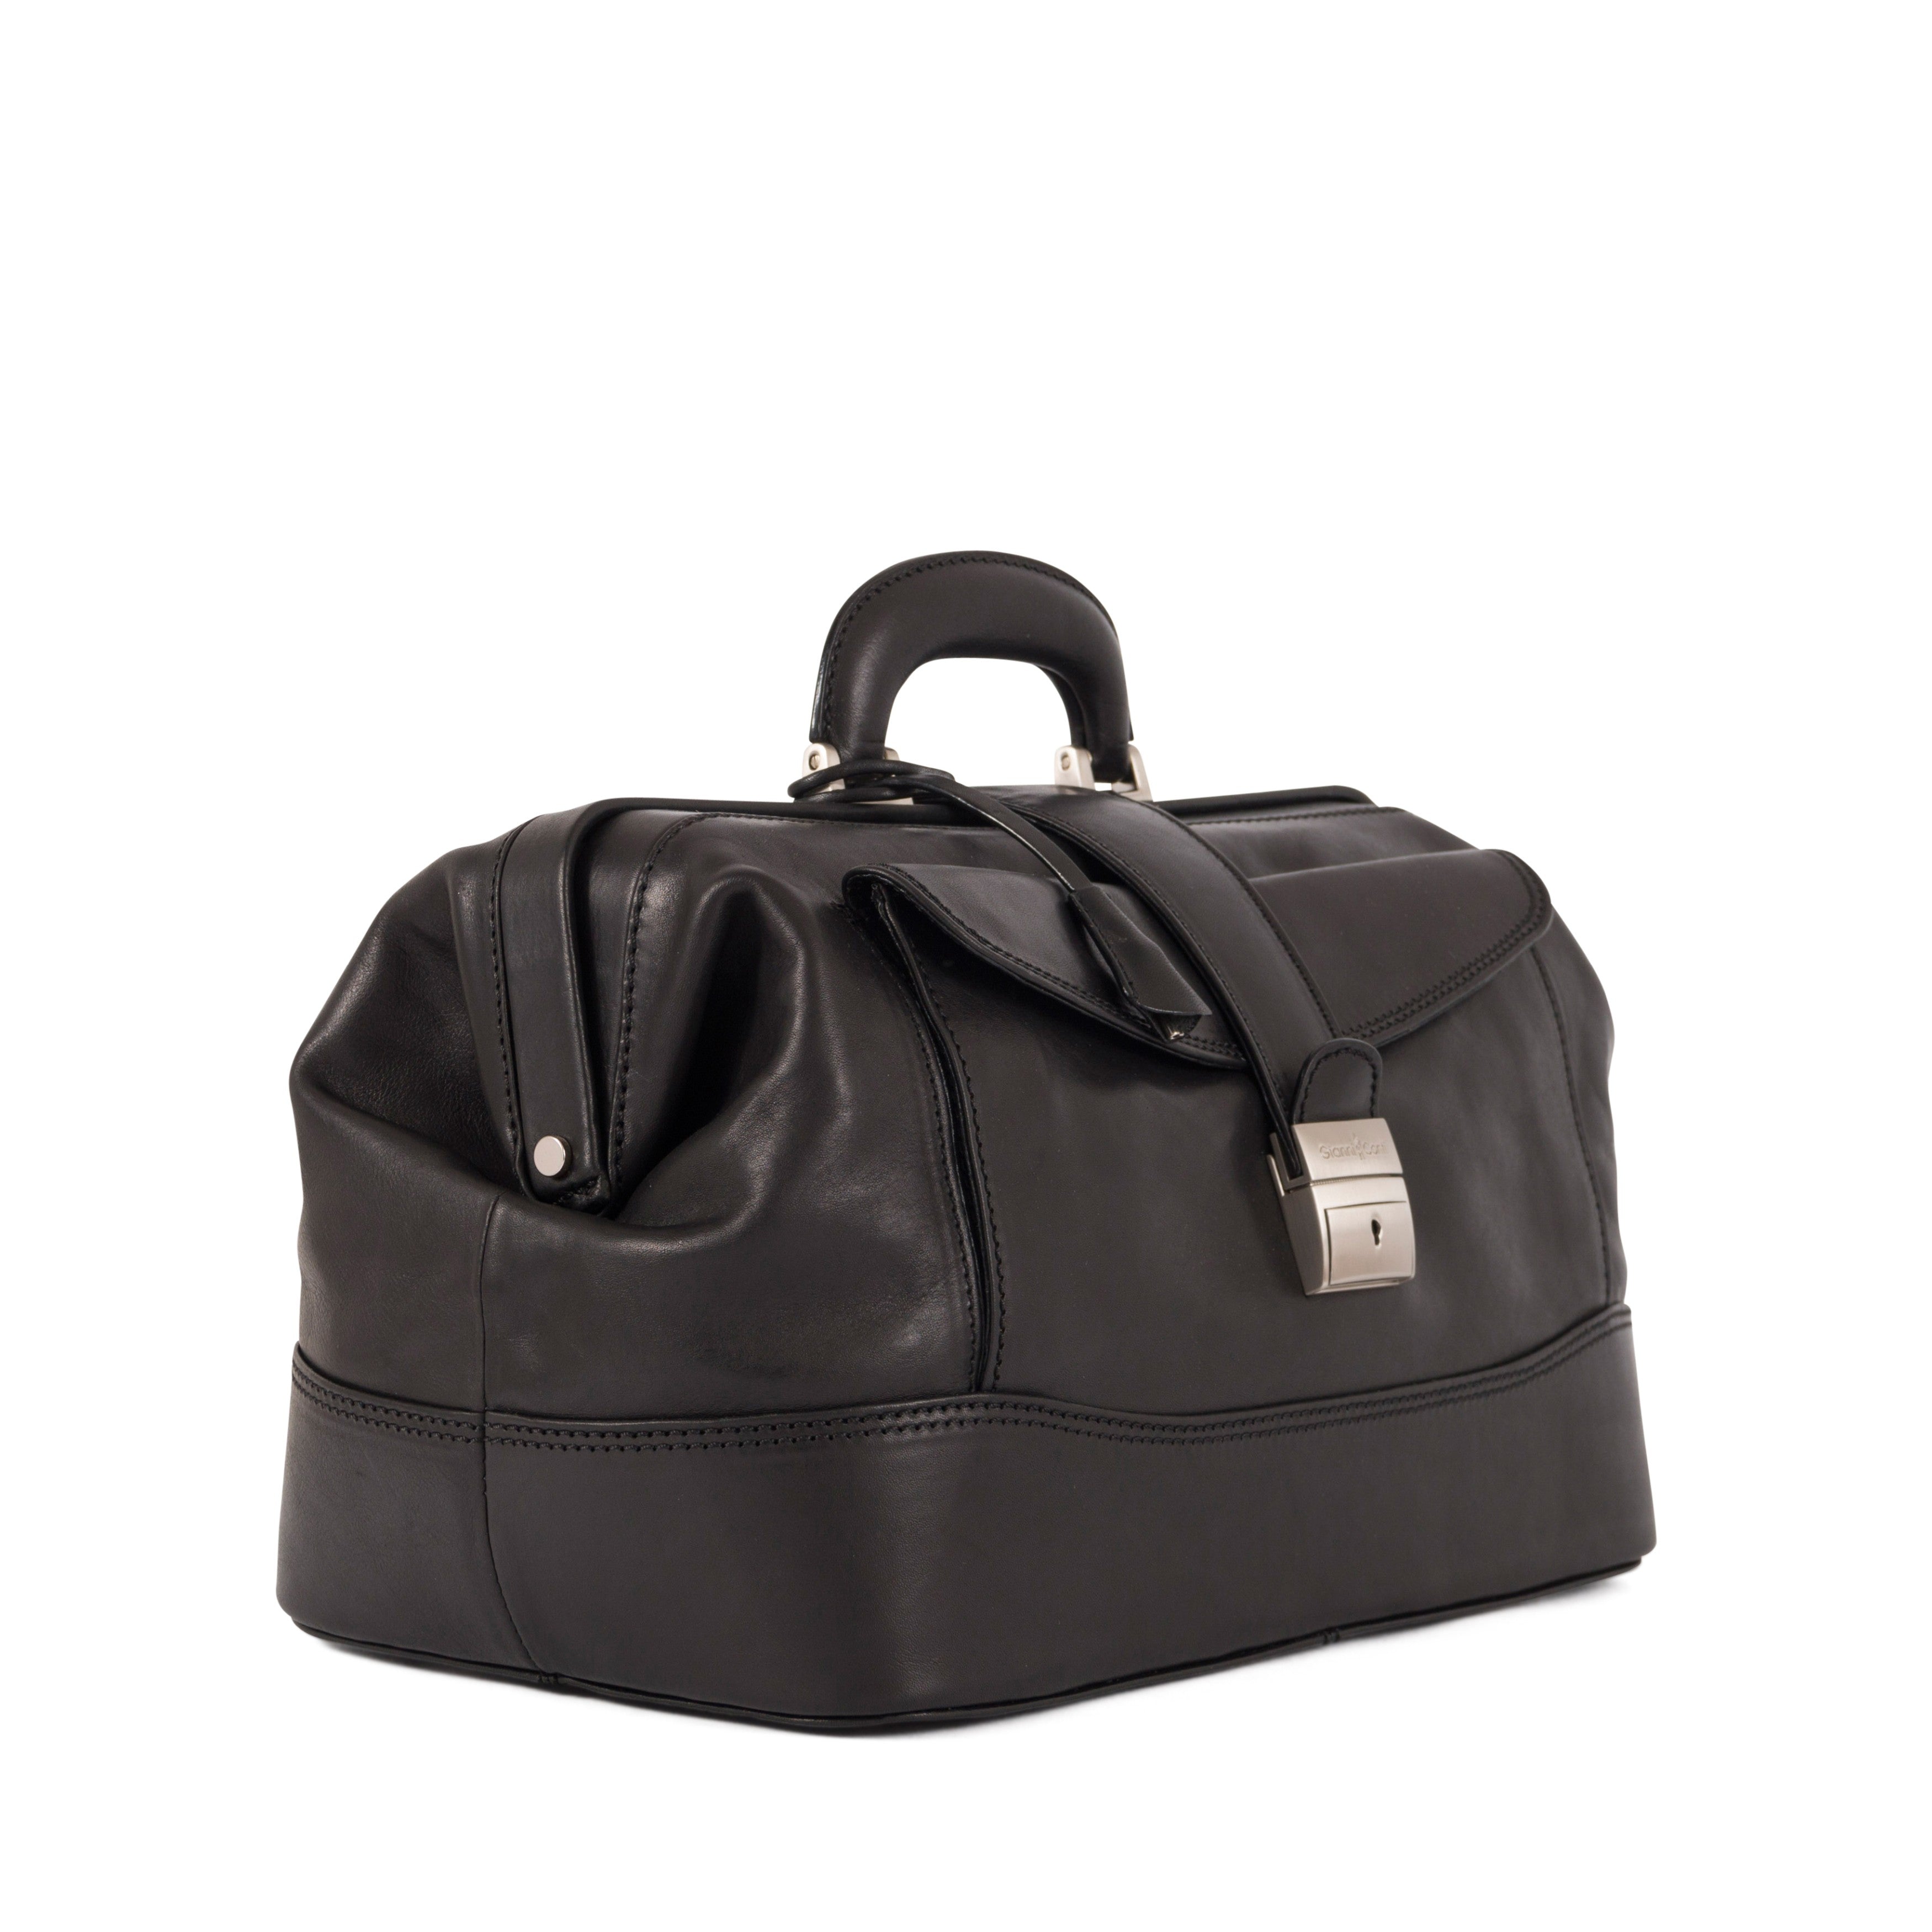 Stacy Doctor Bag by Gianni Conti